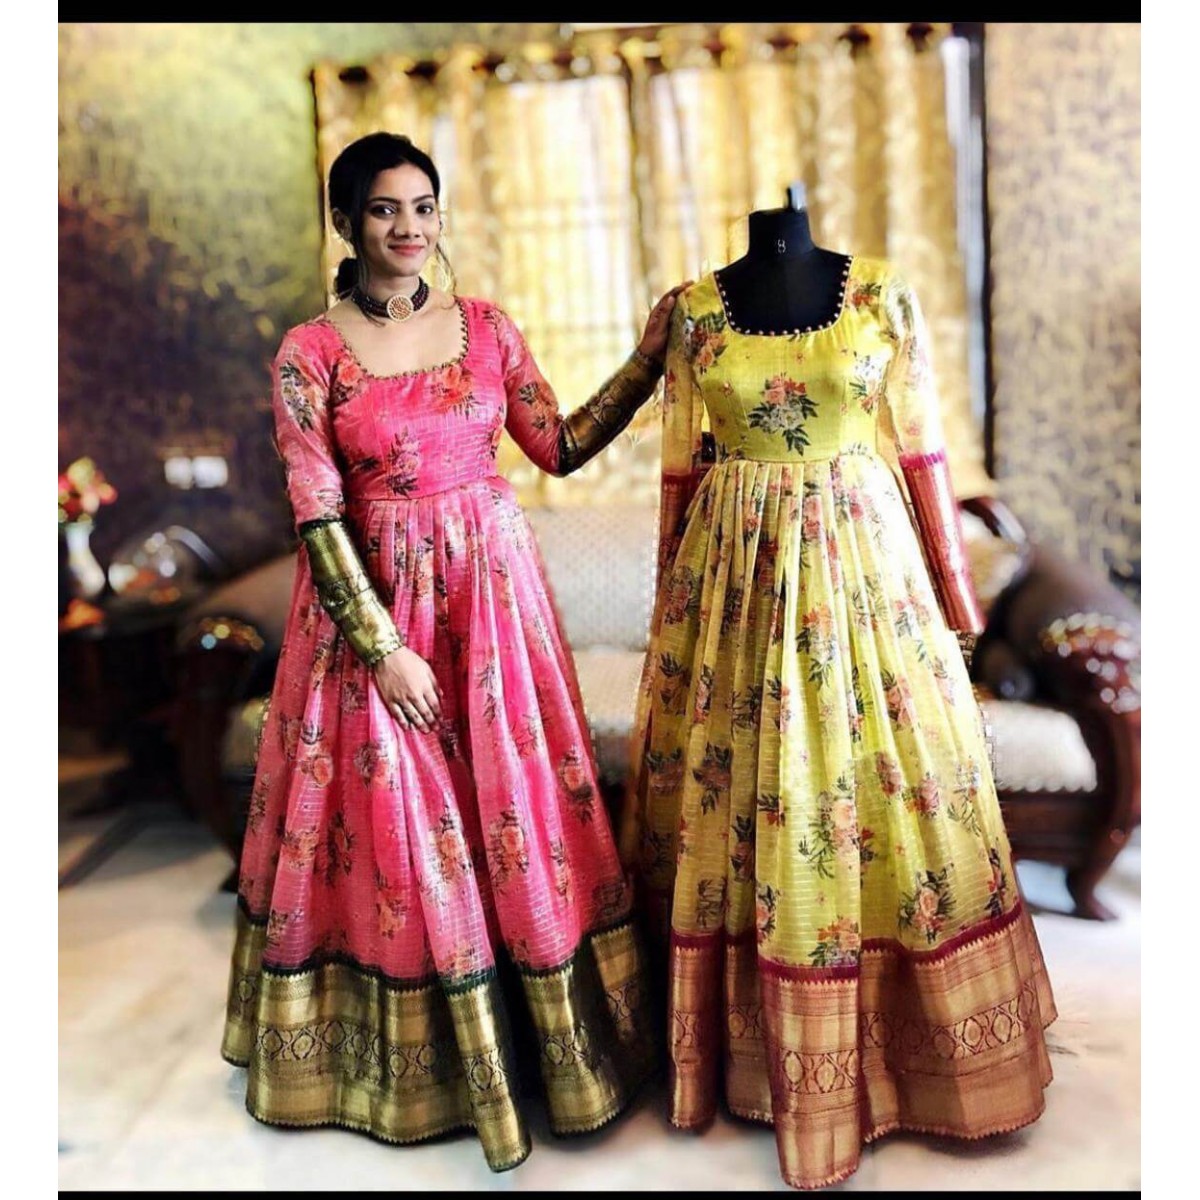 http://www.mongoosekart.com/image/cache/data/1southindiangown/Telugu%20Wedding%20Gown%20Outfit-1200x1200.jpeg